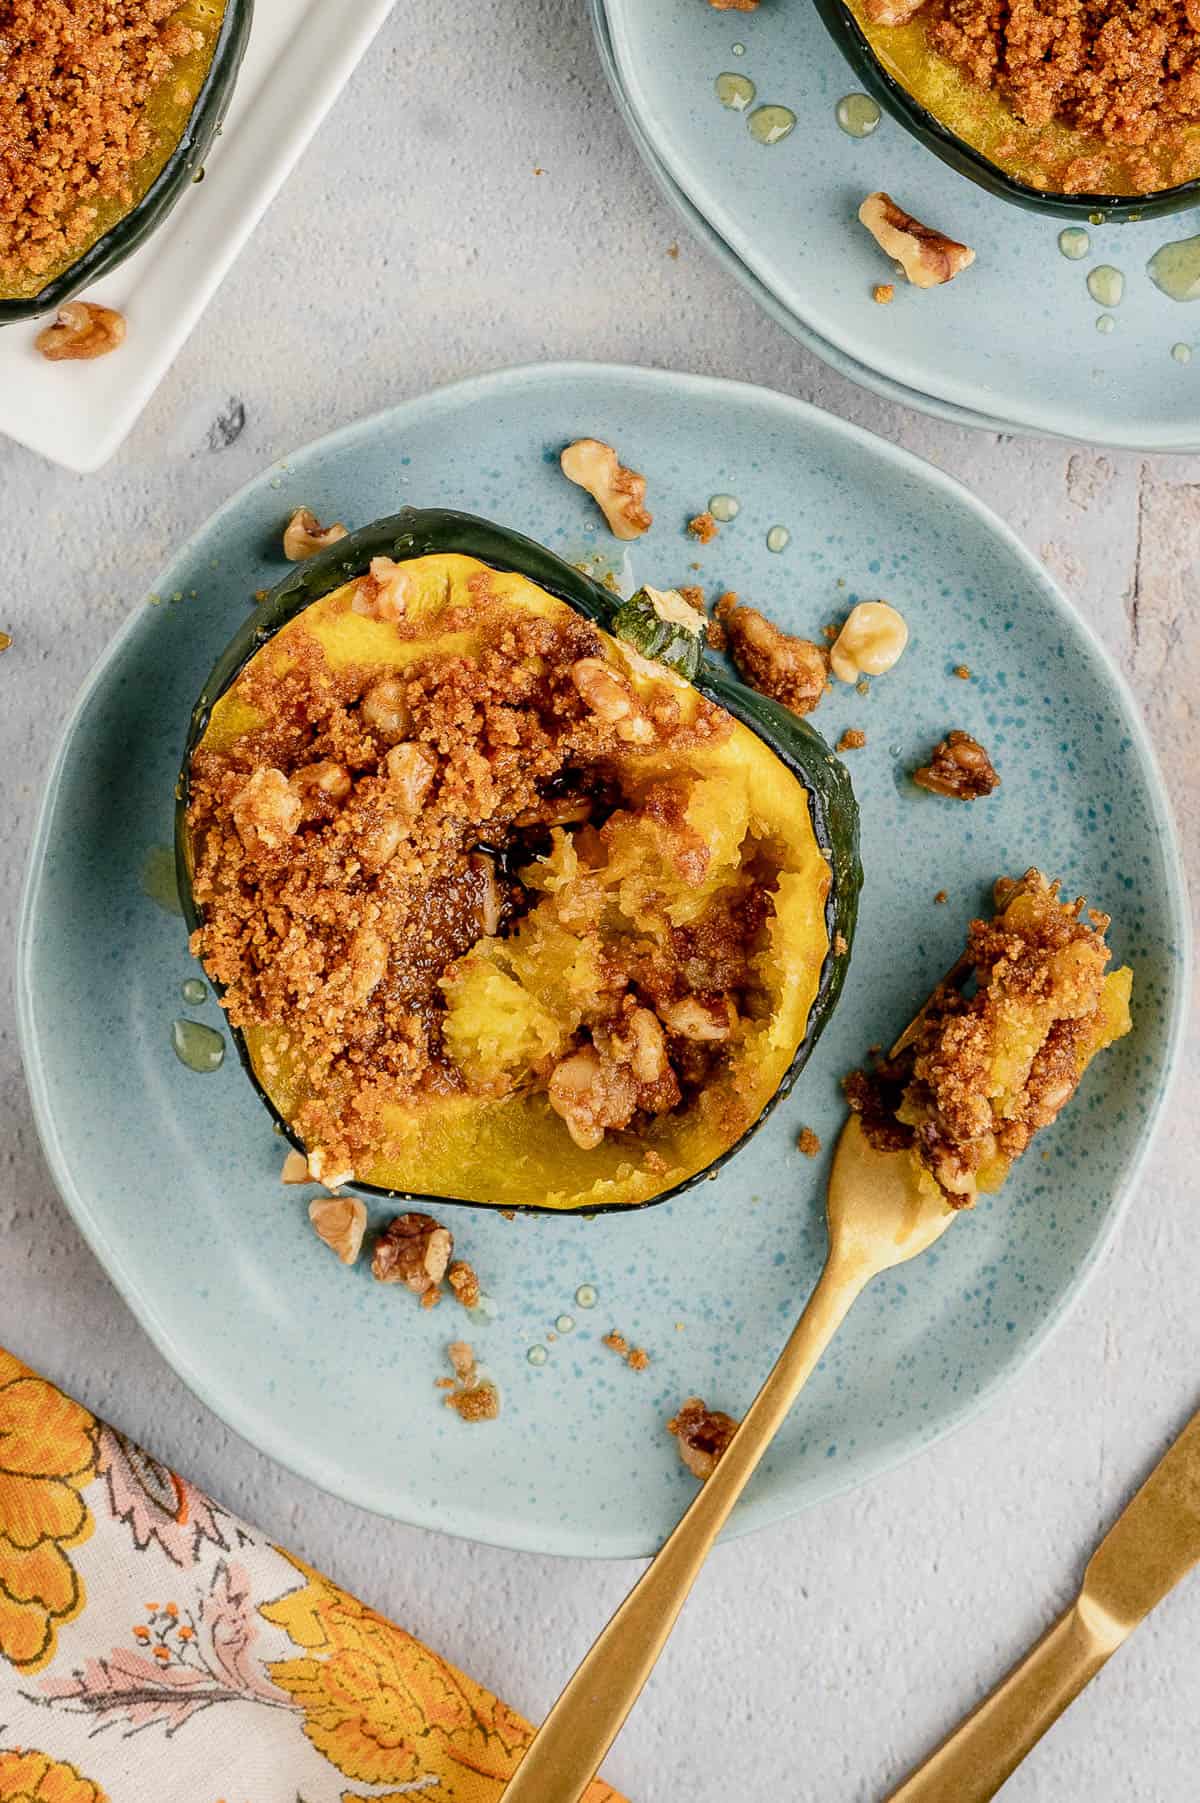 Stuffed and baked acorn squash on a blue plate next to a forkful.